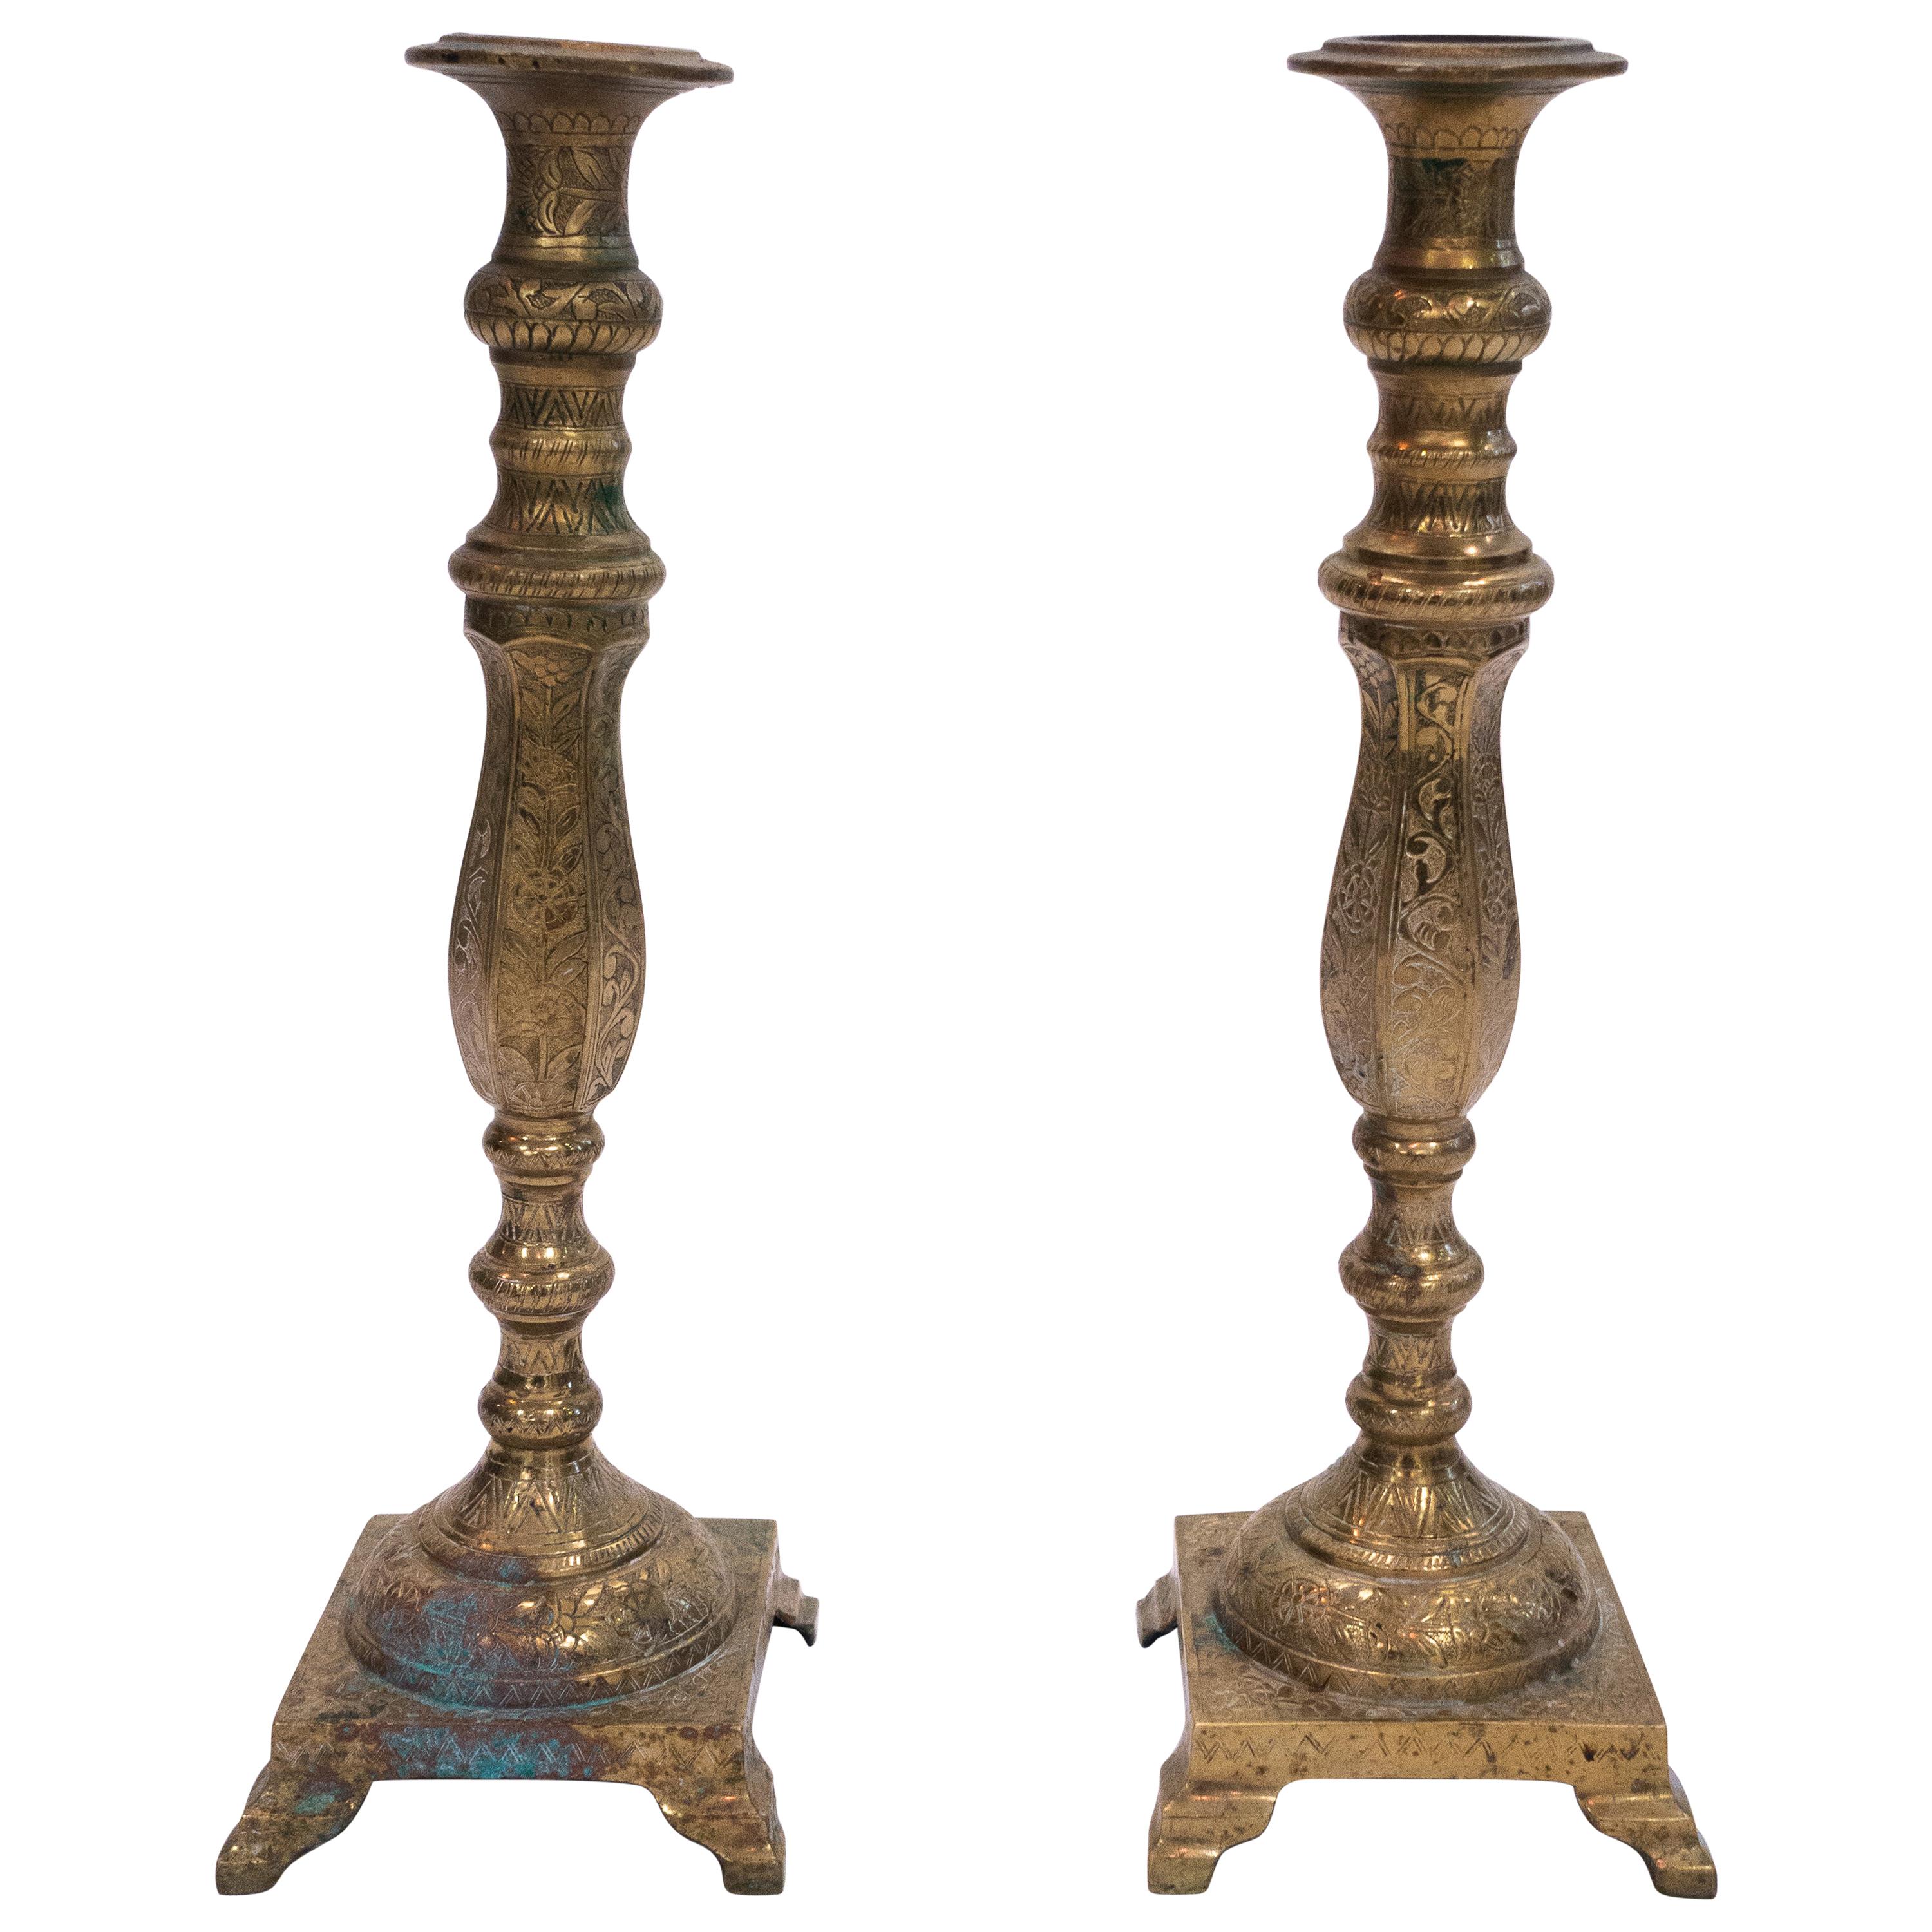 Pair of Tall Moroccan Brass Candlesticks, 1950s